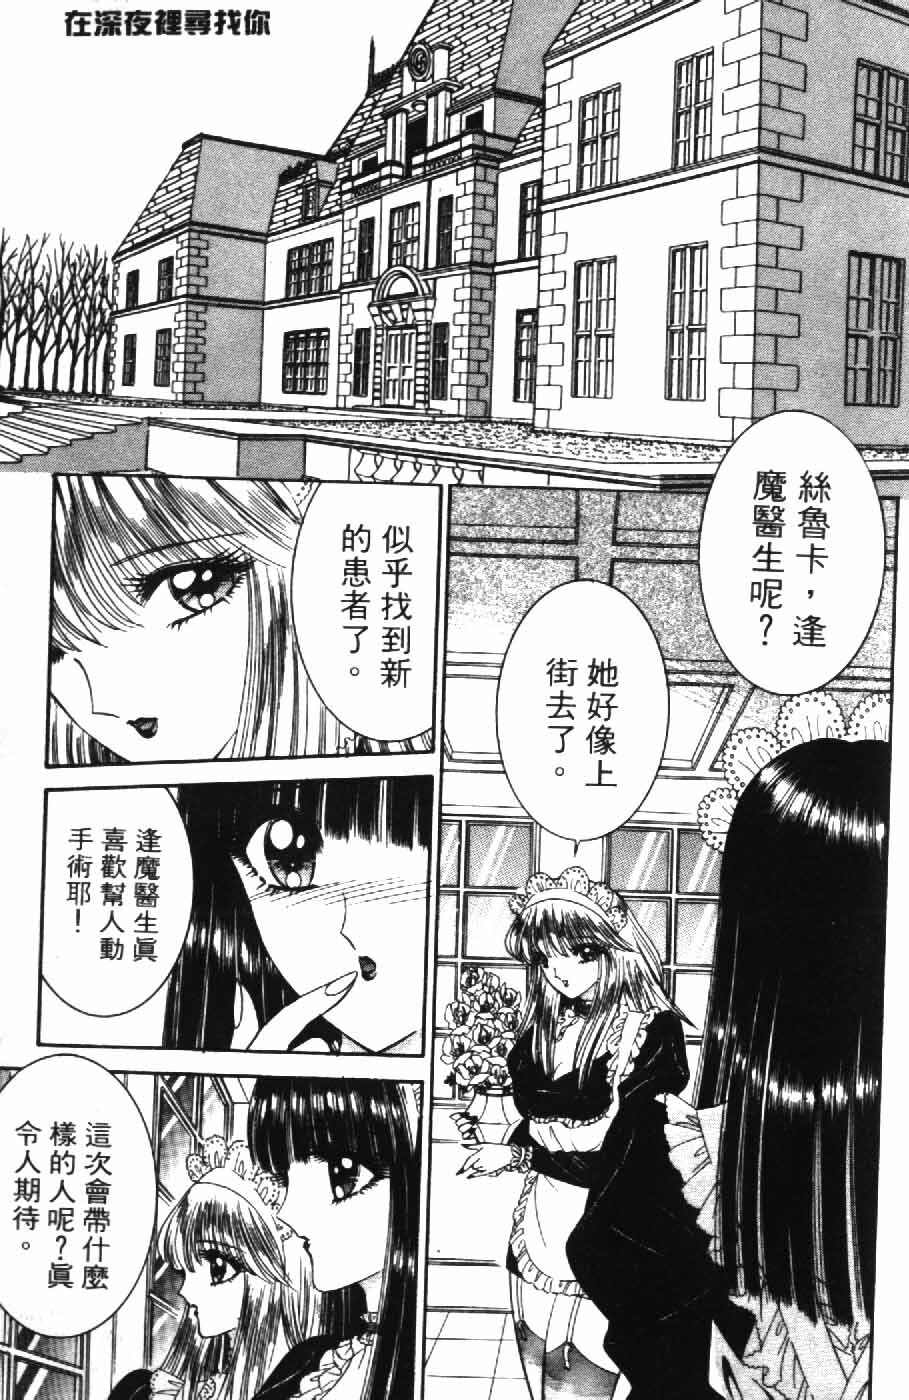 [Senno Knife] Ouma ga Horror Show 2 - Trans Sexual Special Show 2 | 顫慄博覽會 2 [Chinese] page 3 full